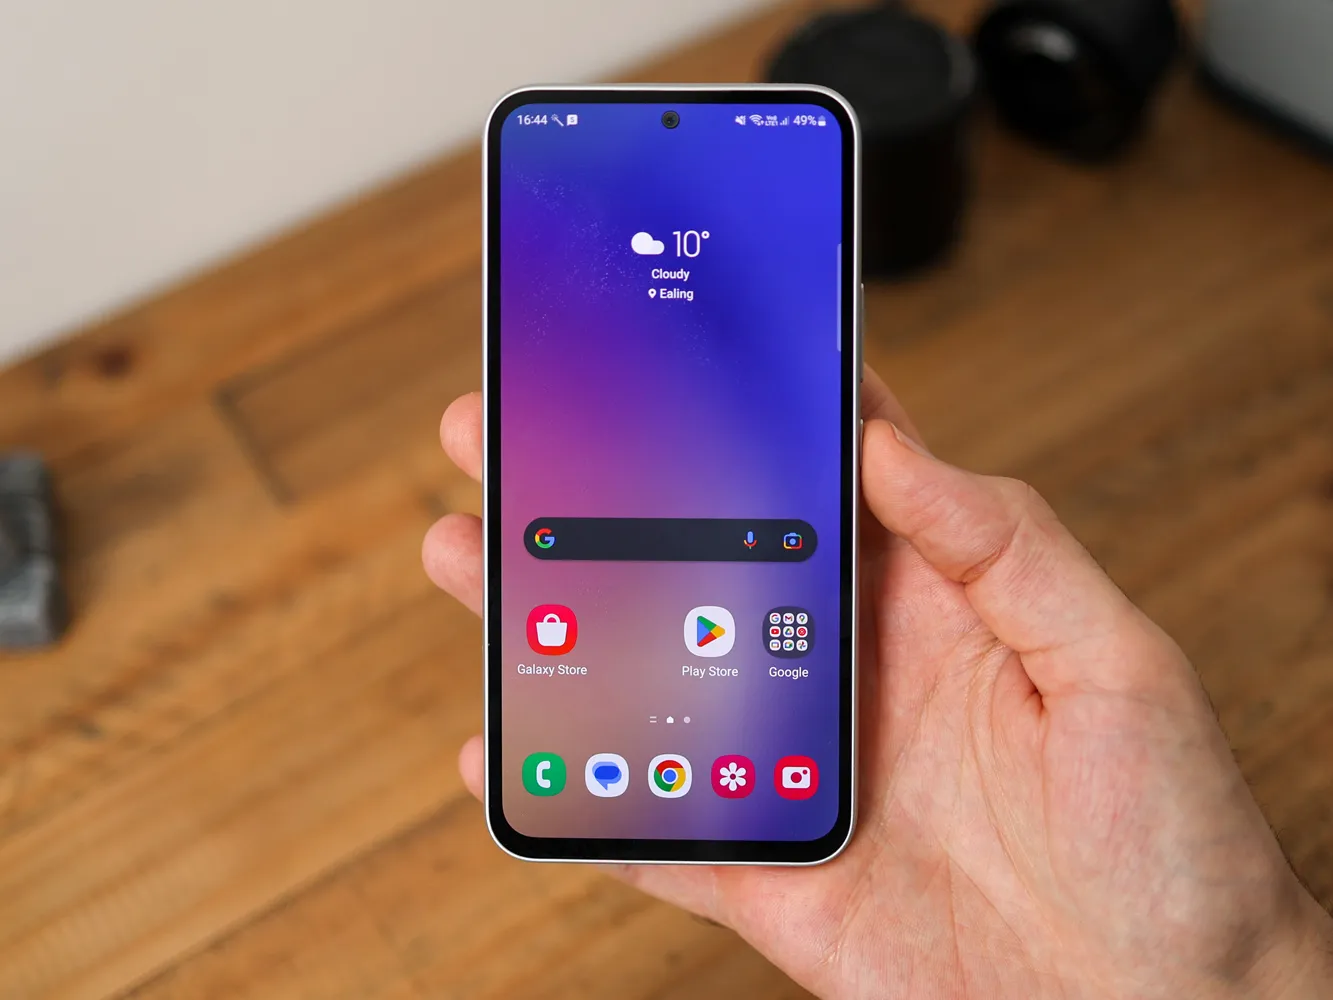 Galaxy Note 10 Lite has older specs but user experience makes it a winner